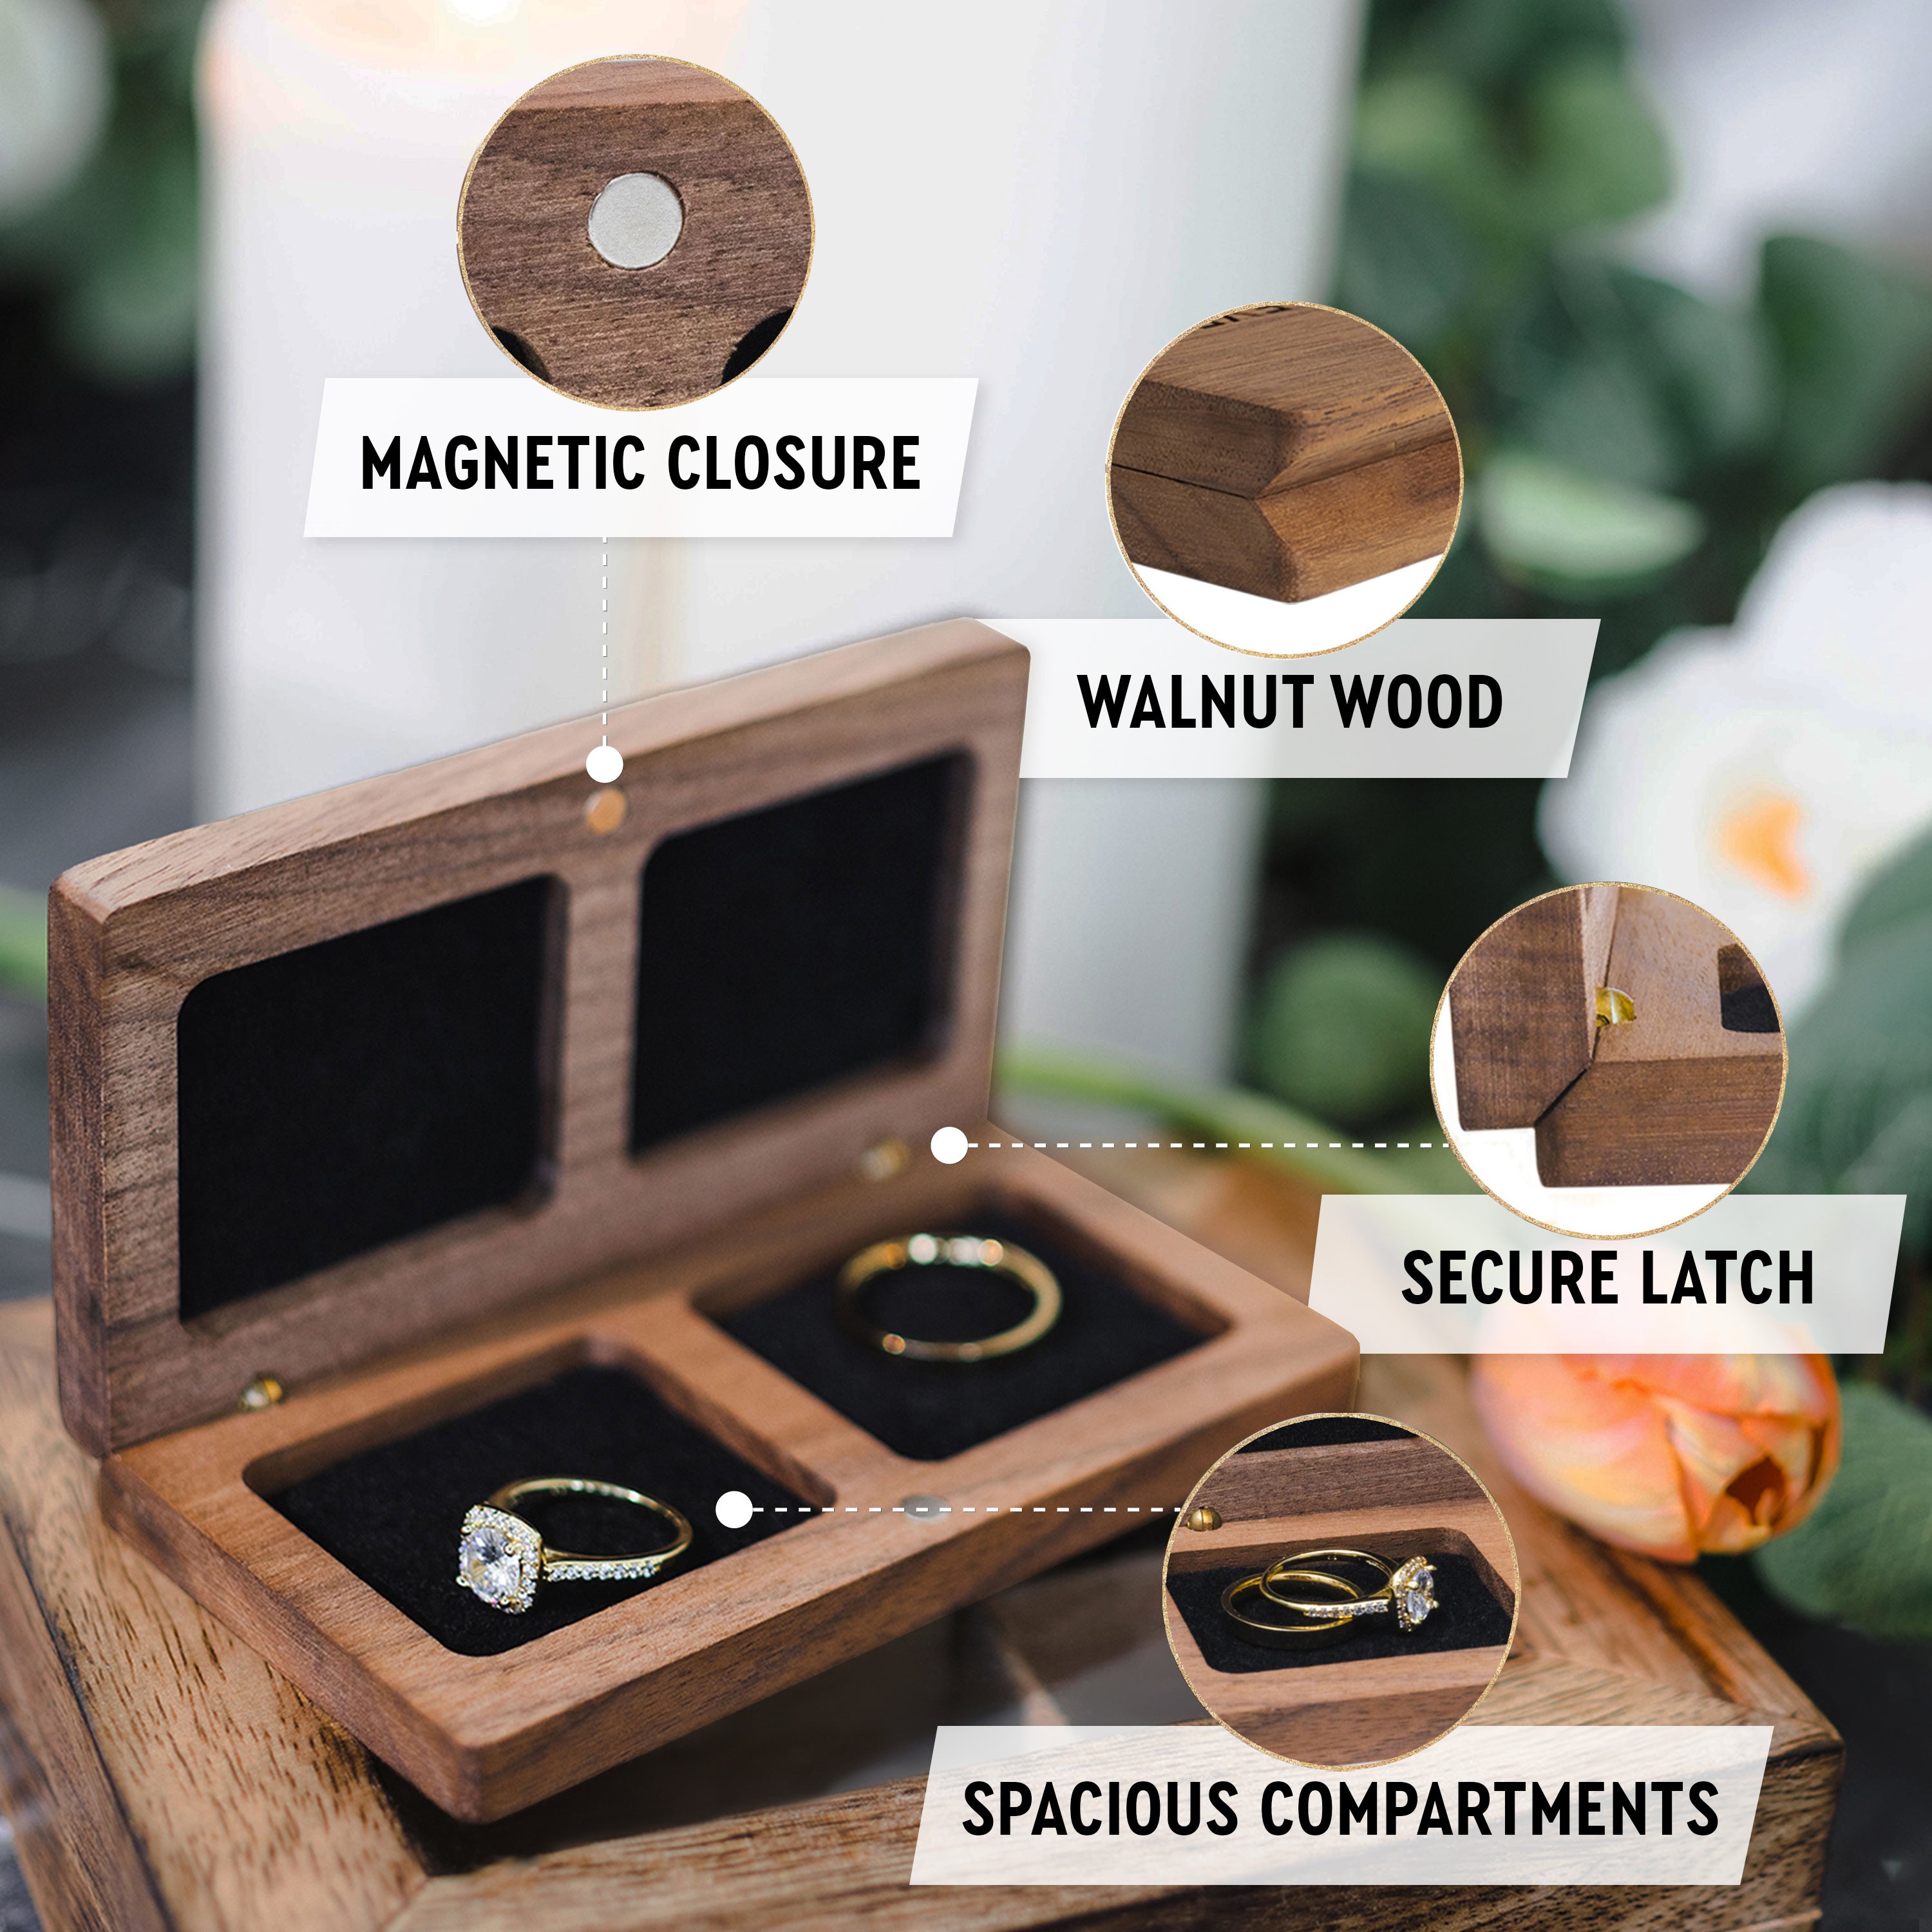 AW Wedding Ring Box Engagement Ring Bearer Box Wooden Double Ring Box  Decorative Jewelry Box Rustic Decor Box : Amazon.in: Jewellery